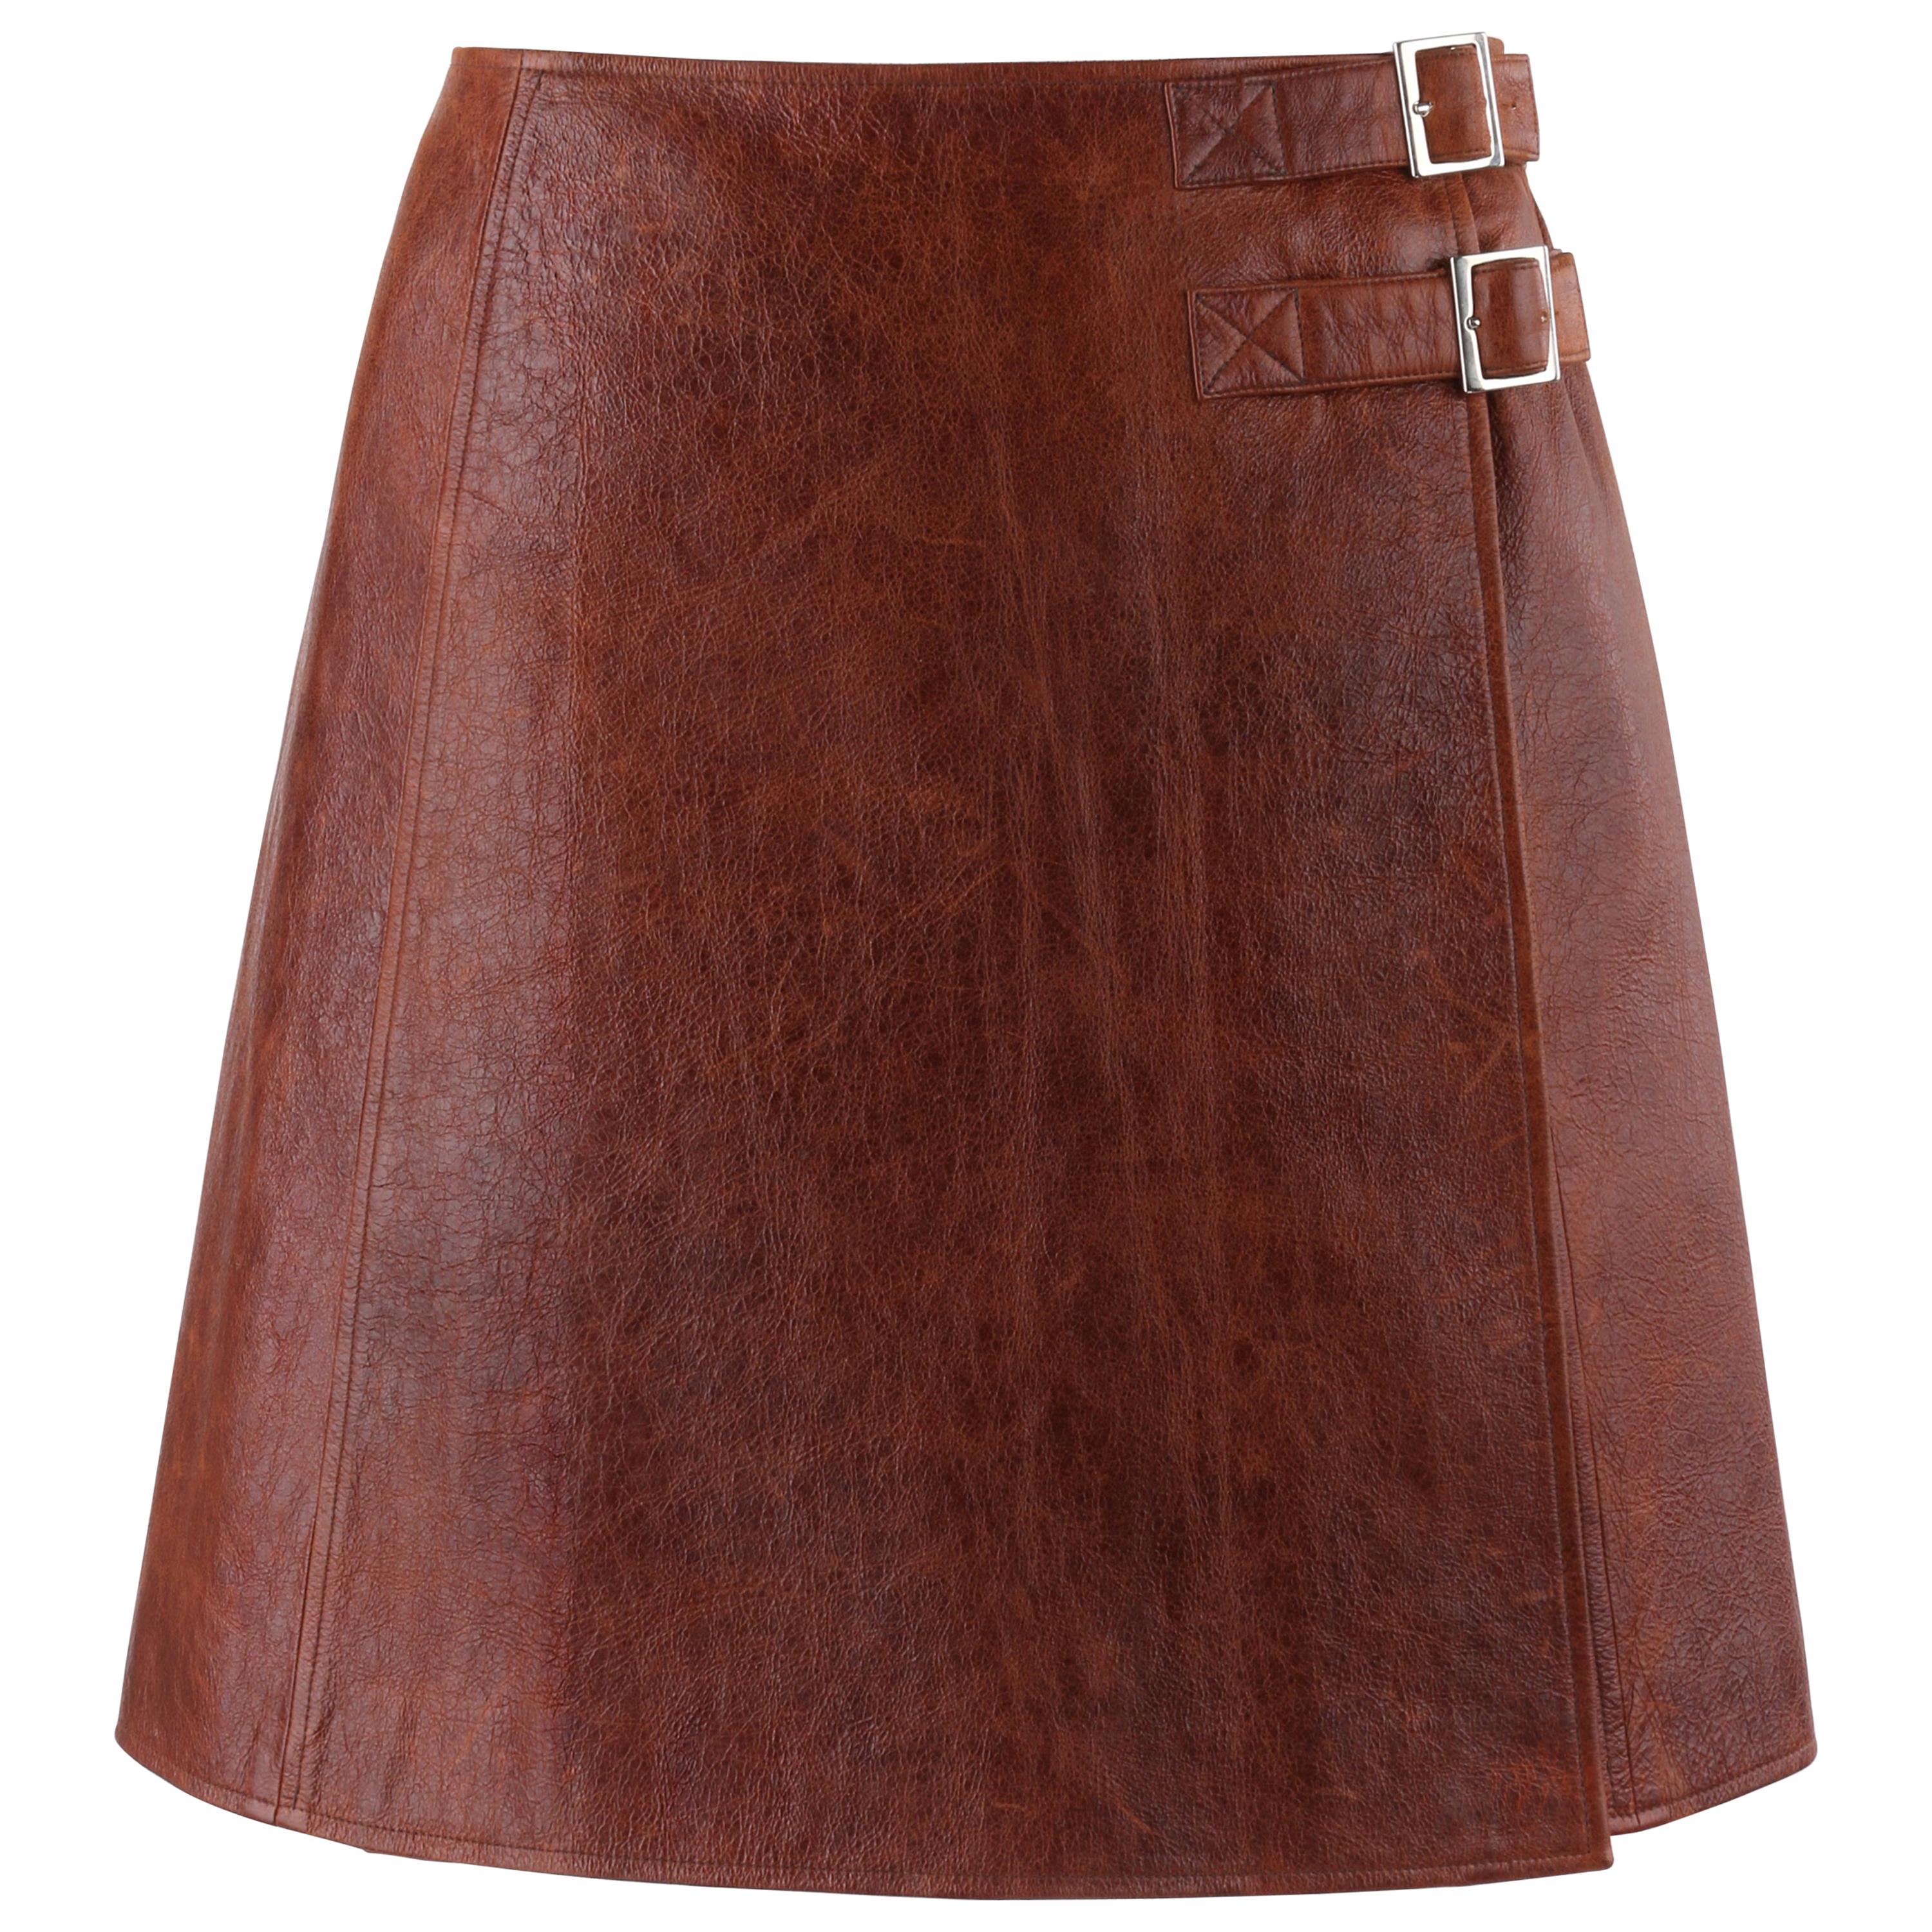 PACO RABANNE Sienna Brown Lamb Leather Dual Buckle A-Line Wrap Skirt